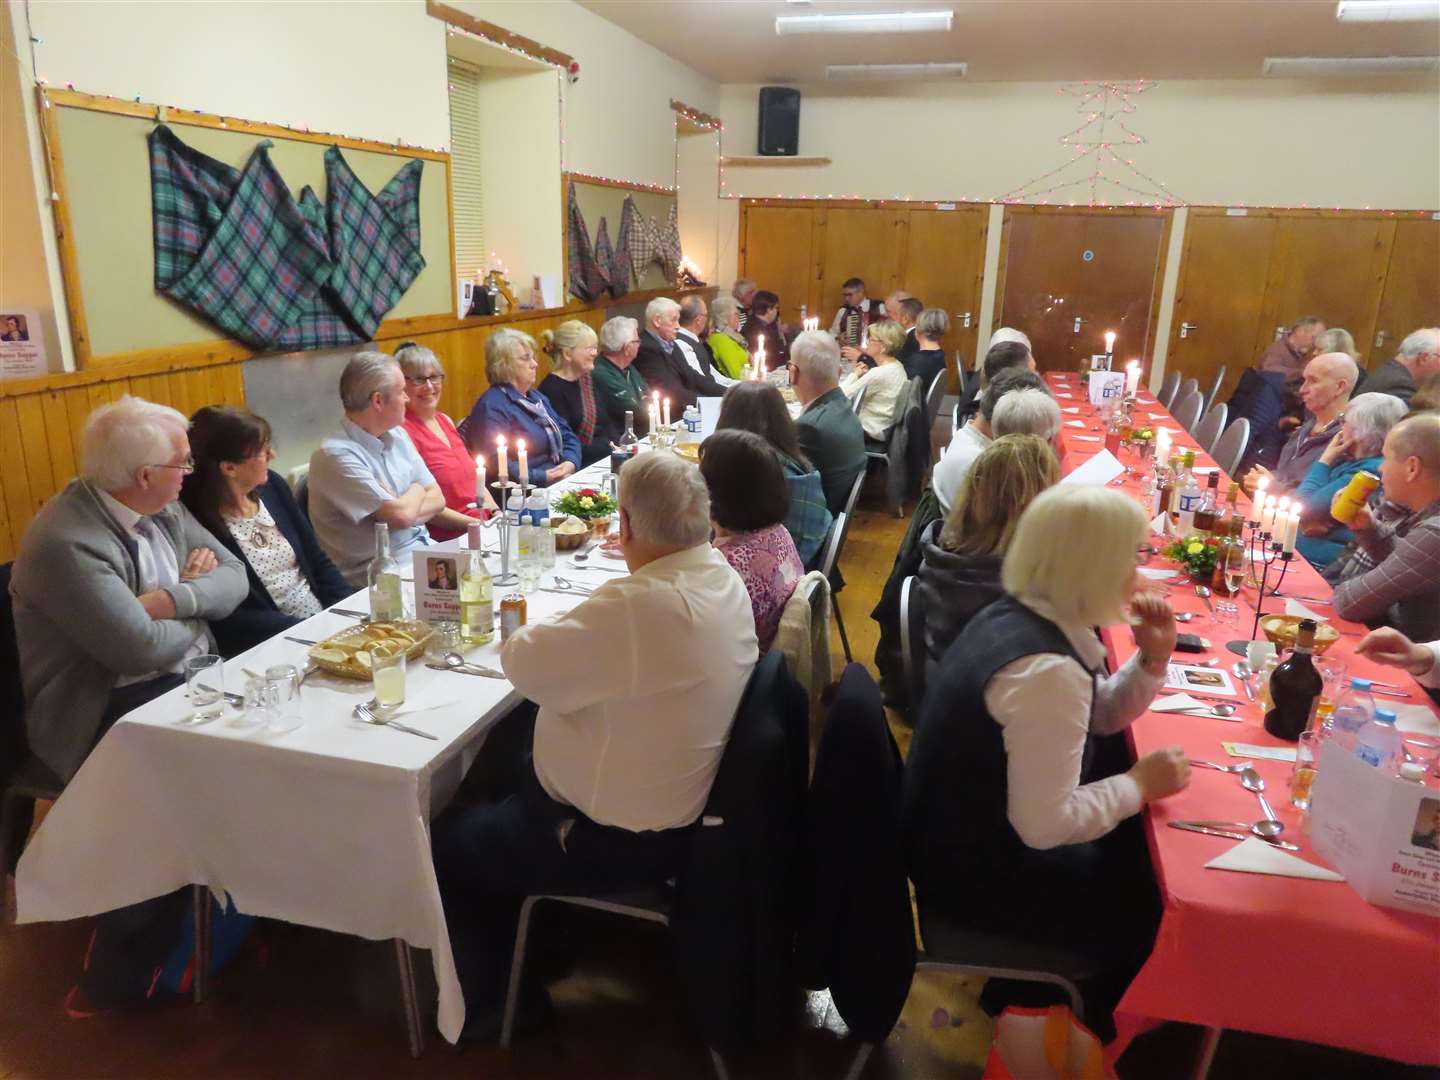 The Burns supper at the Scout and Guide Hall in Brora has been held every year since 1998 apart from the two years during COVID in 2021 or 2022.